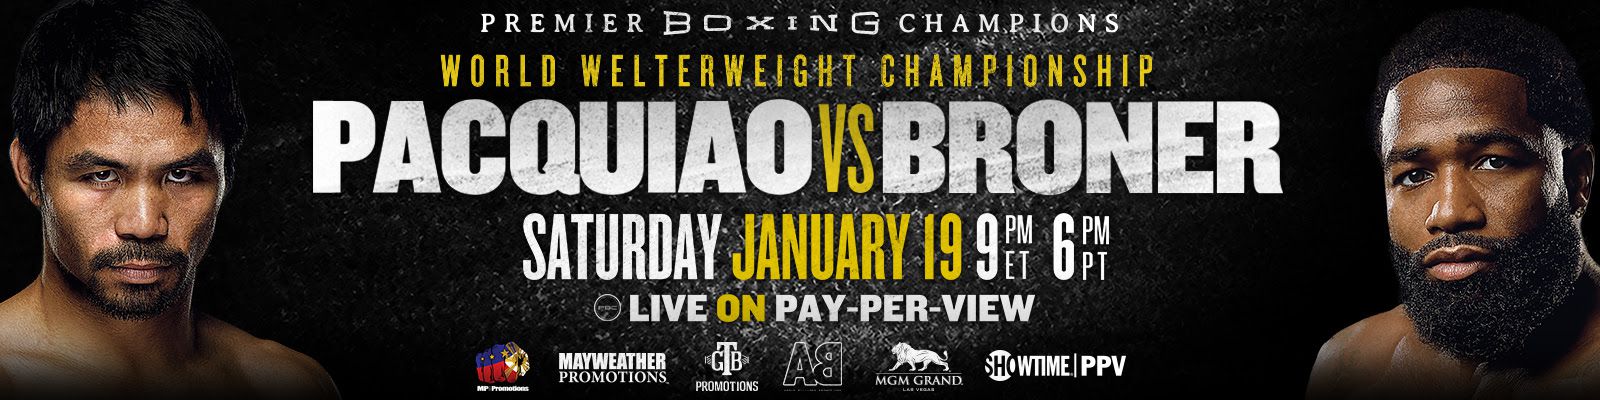 Two-Division Champ Badou Jack Battles Undefeated Top Contender Marcus Browne for WBA Interim 175-Pound Title On Pac vs. Broner SHOWTIME PPV®